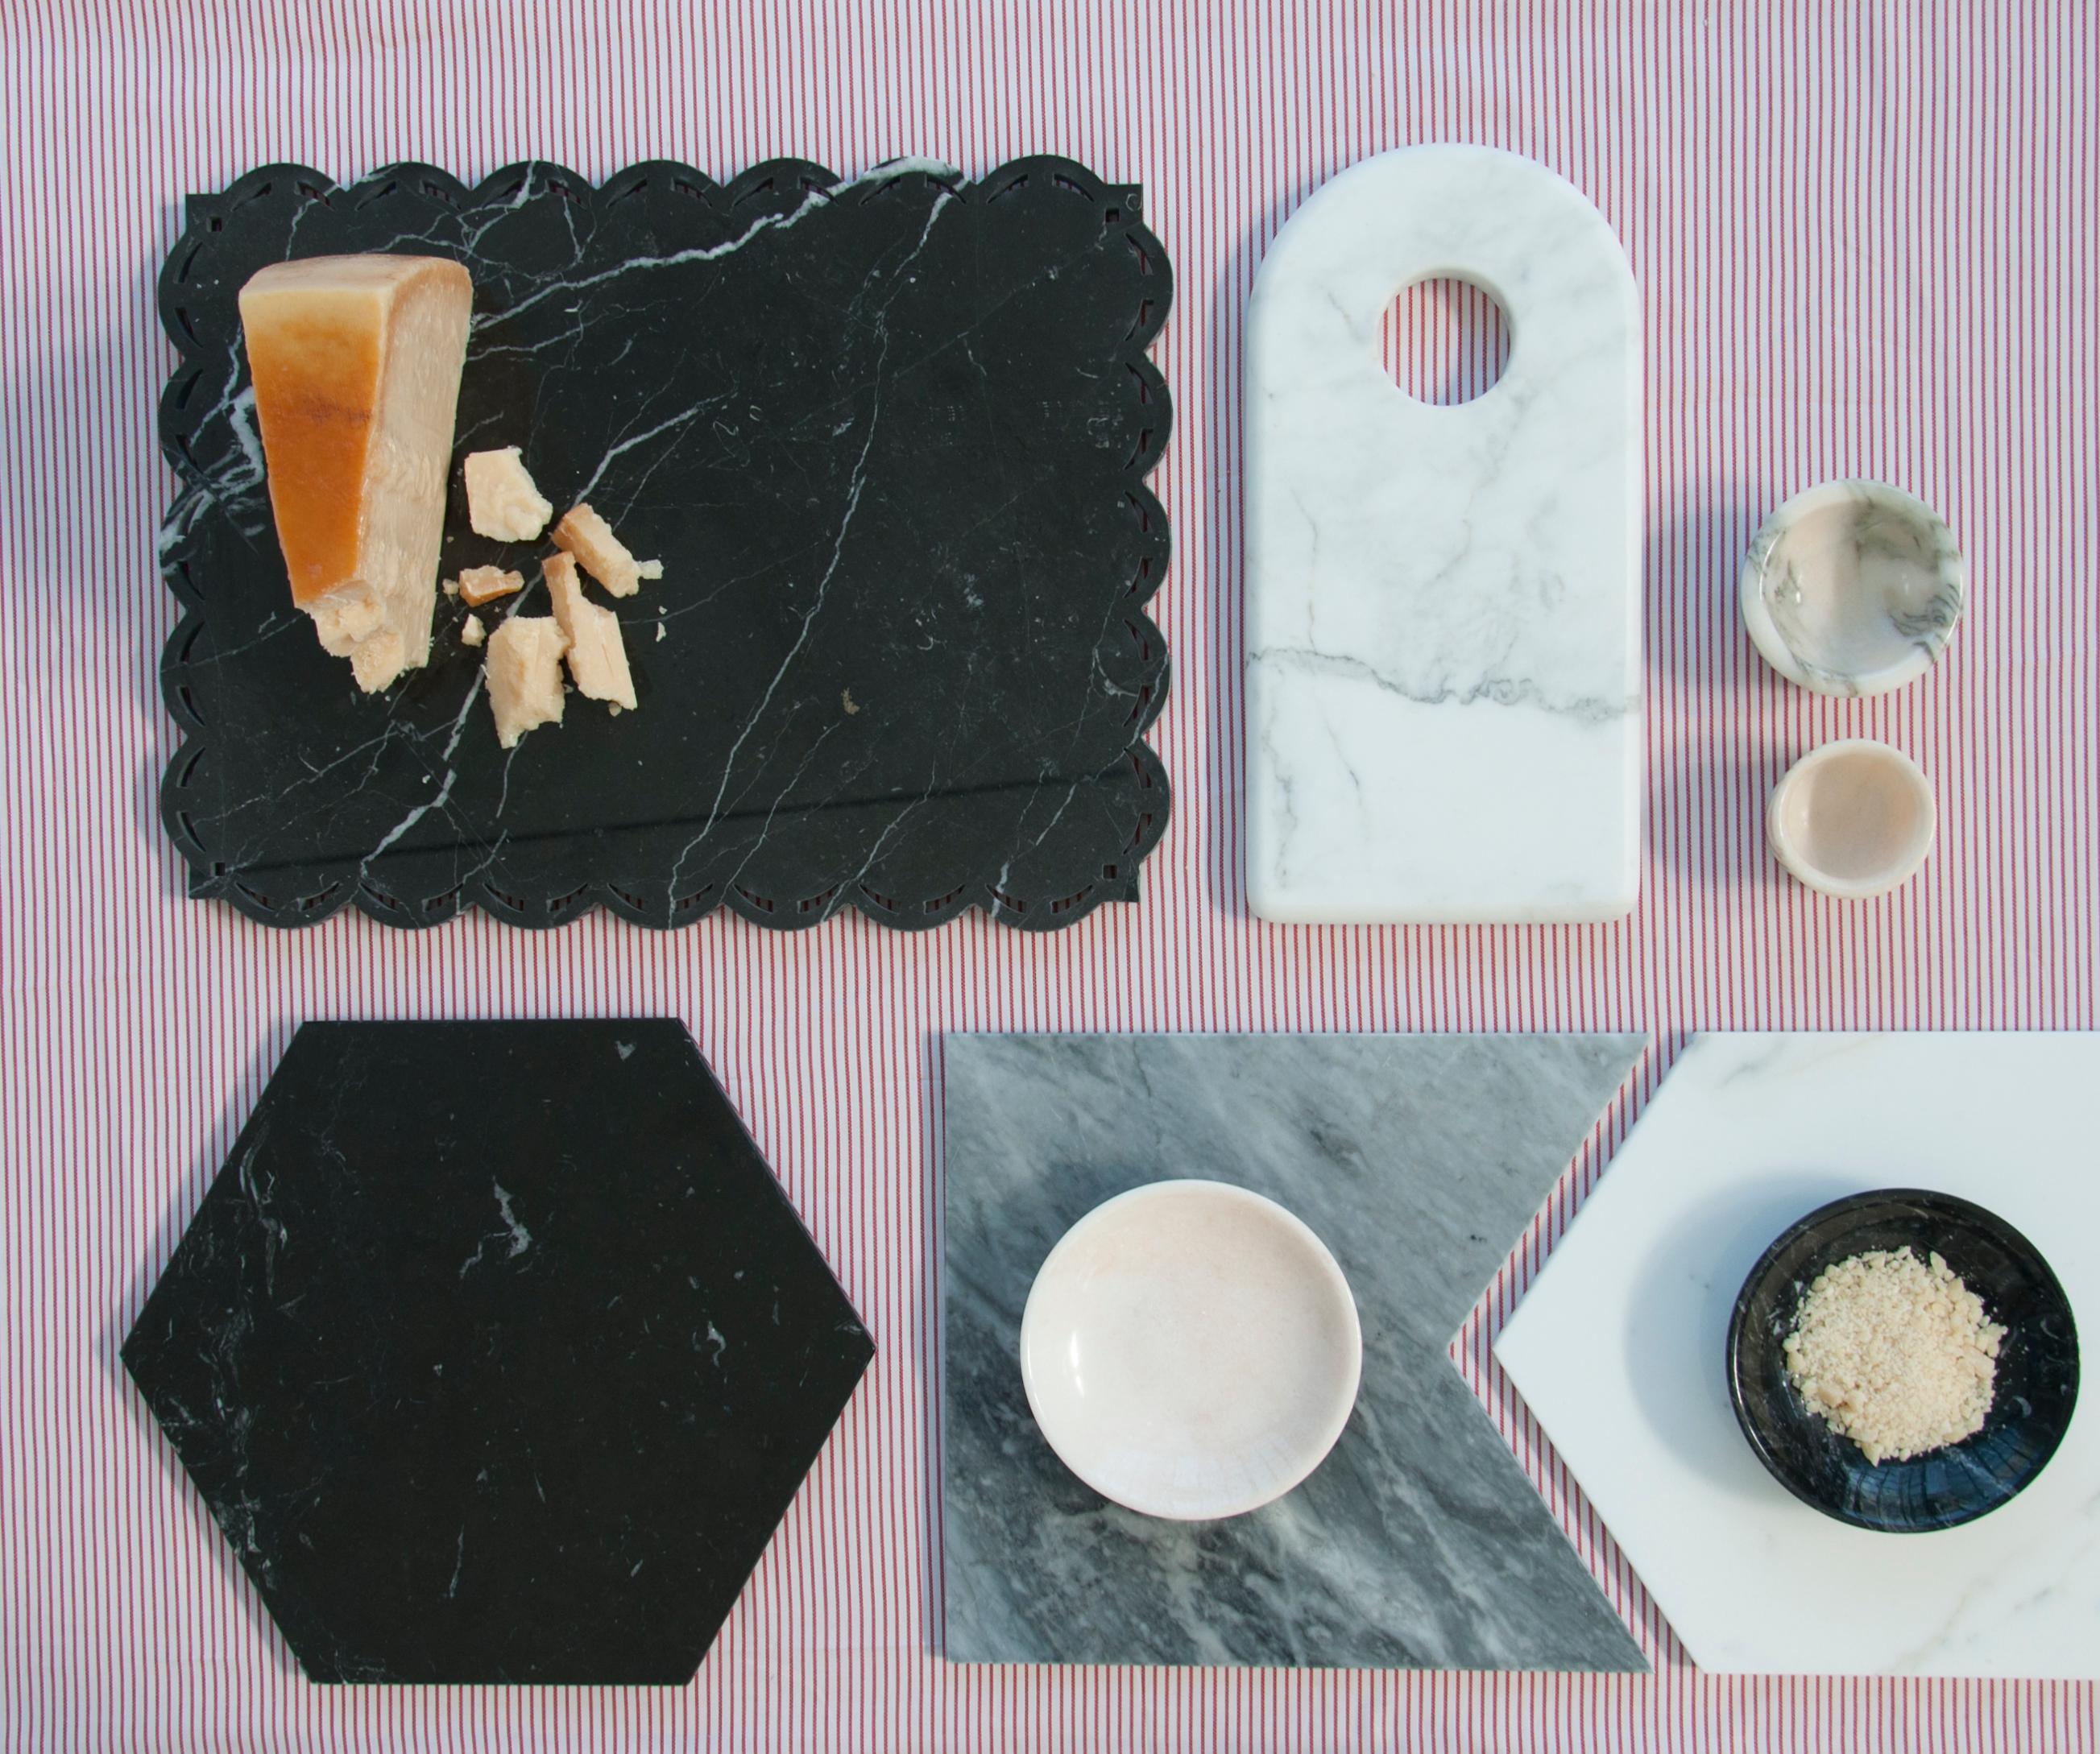 Marble place-mat with lace edge in white Carrara marble. It can be used also as a marble tray. Each piece is in a way unique (every marble block is different in veins and shades) and handmade by Italian artisans specialized over generations in